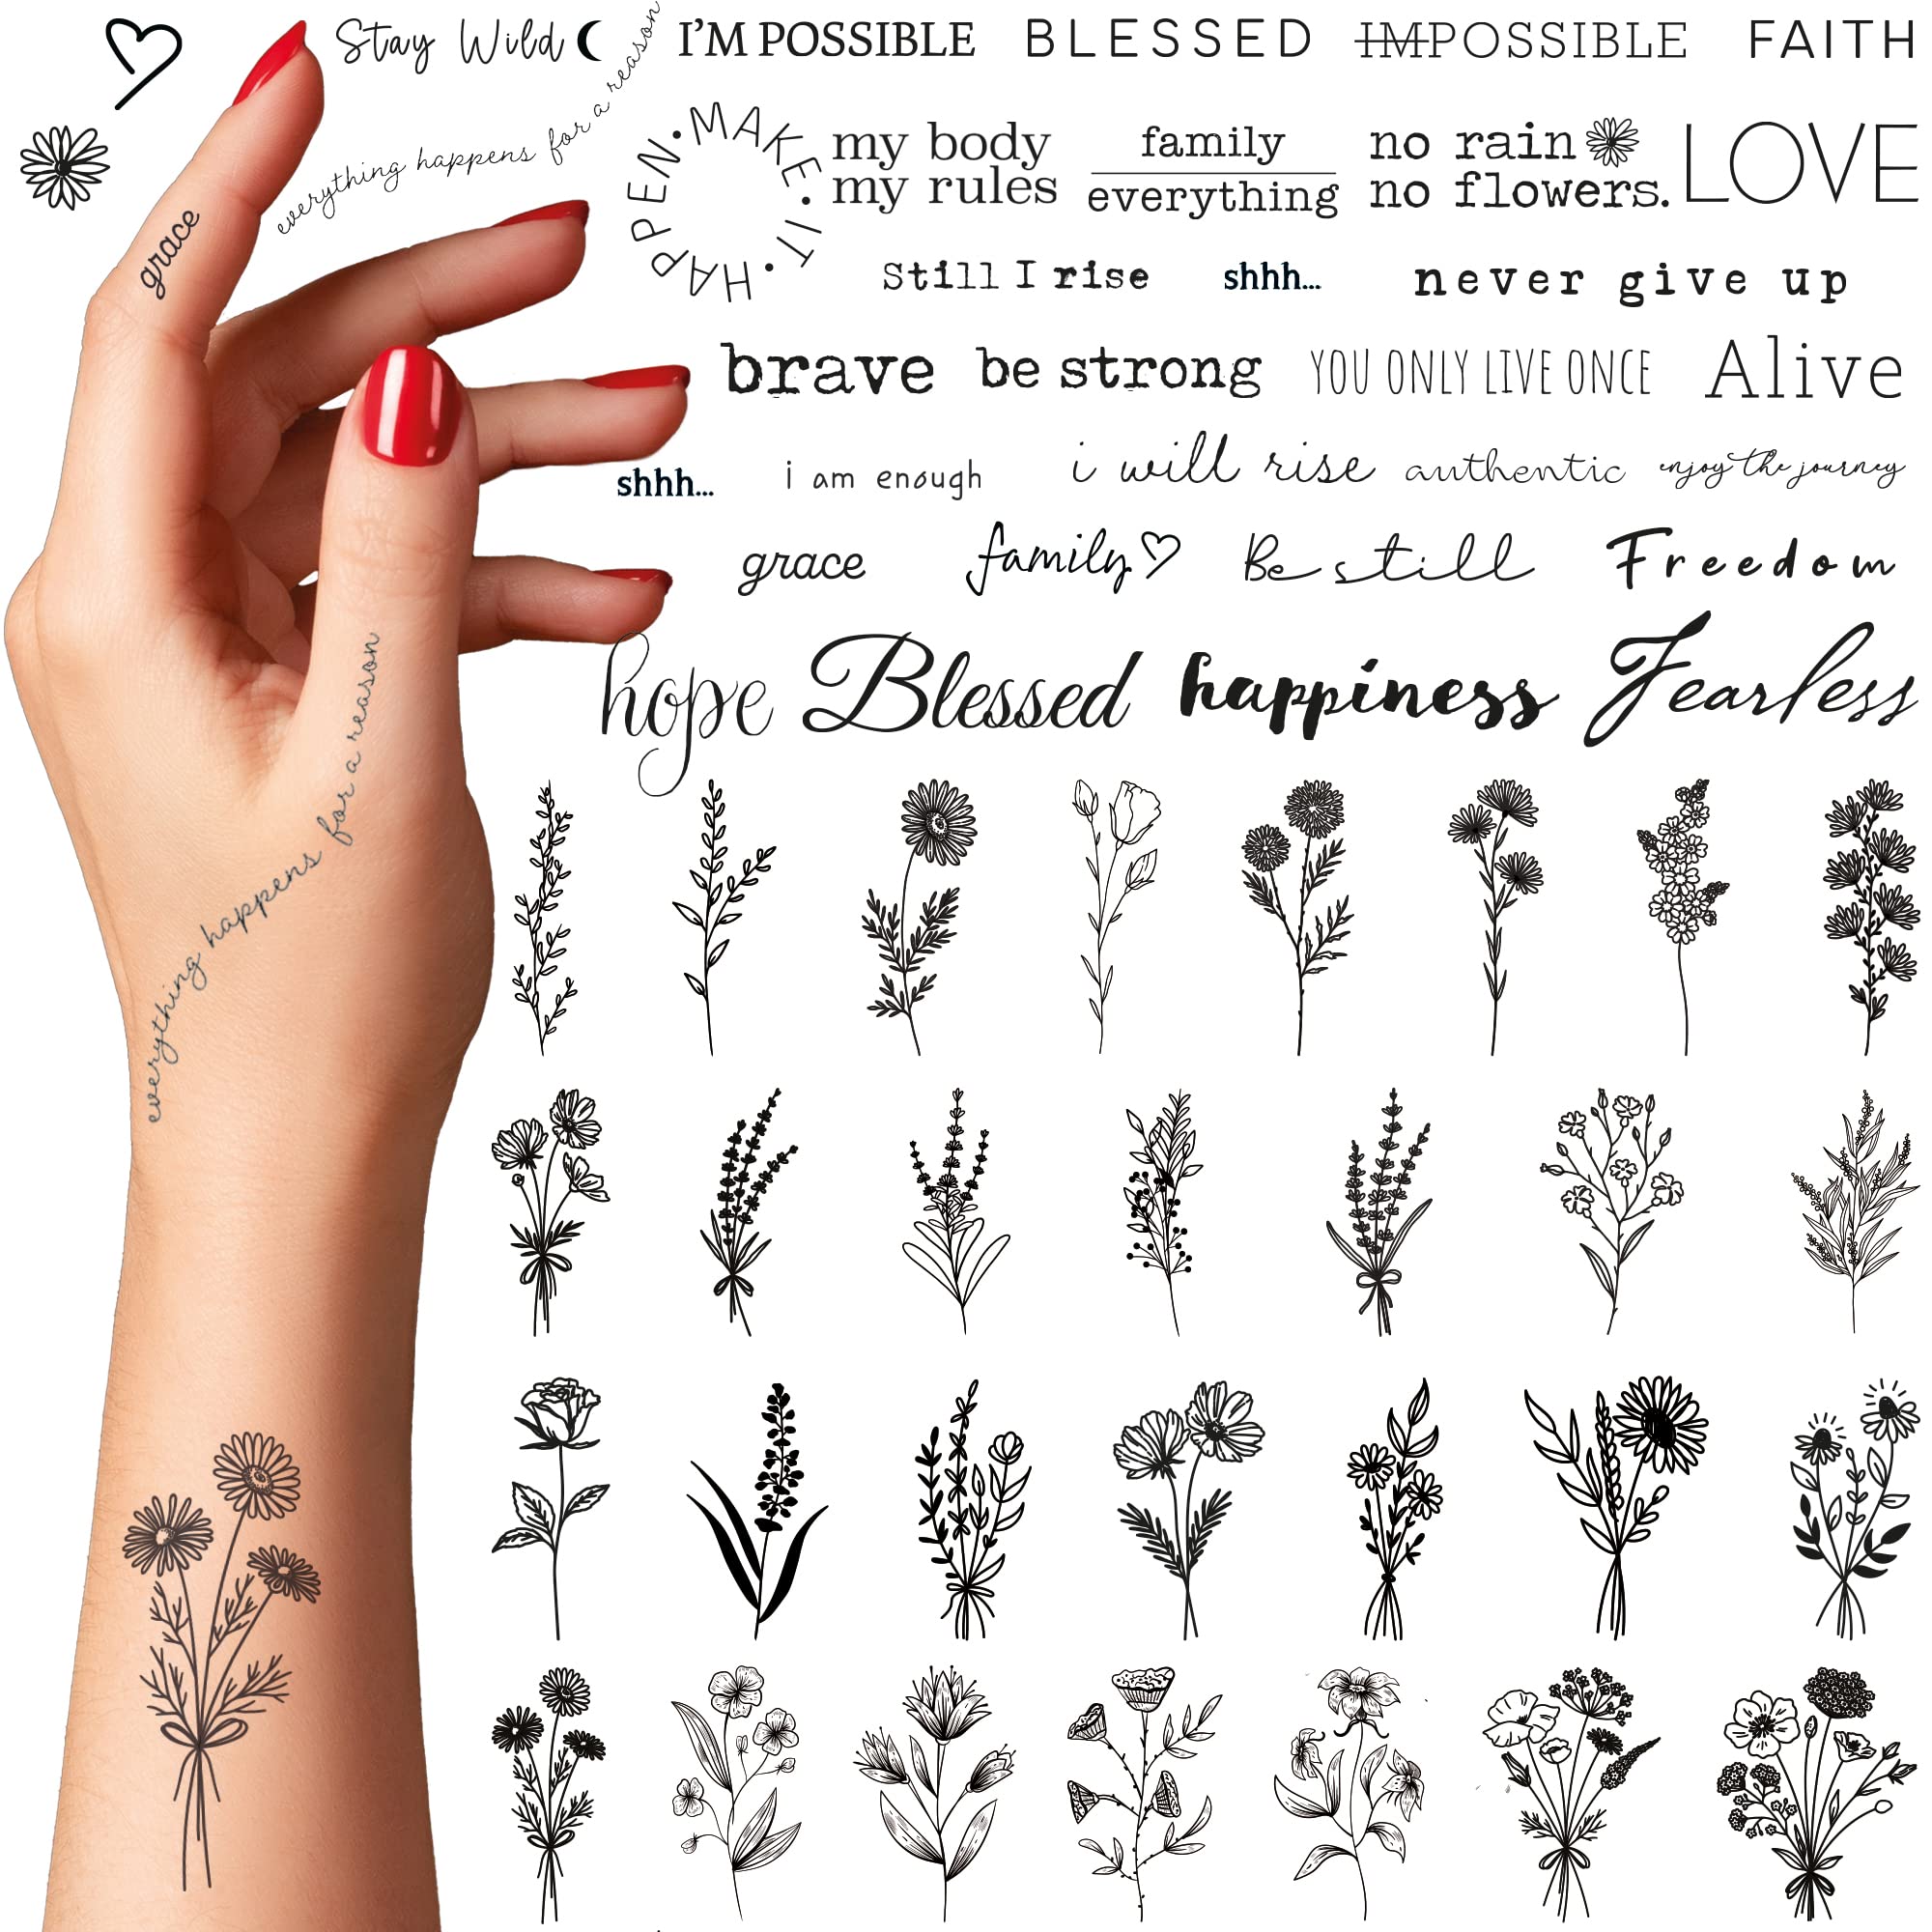 Temporary Tattoos For Women -110 Temporary Tattoo Stickers Of